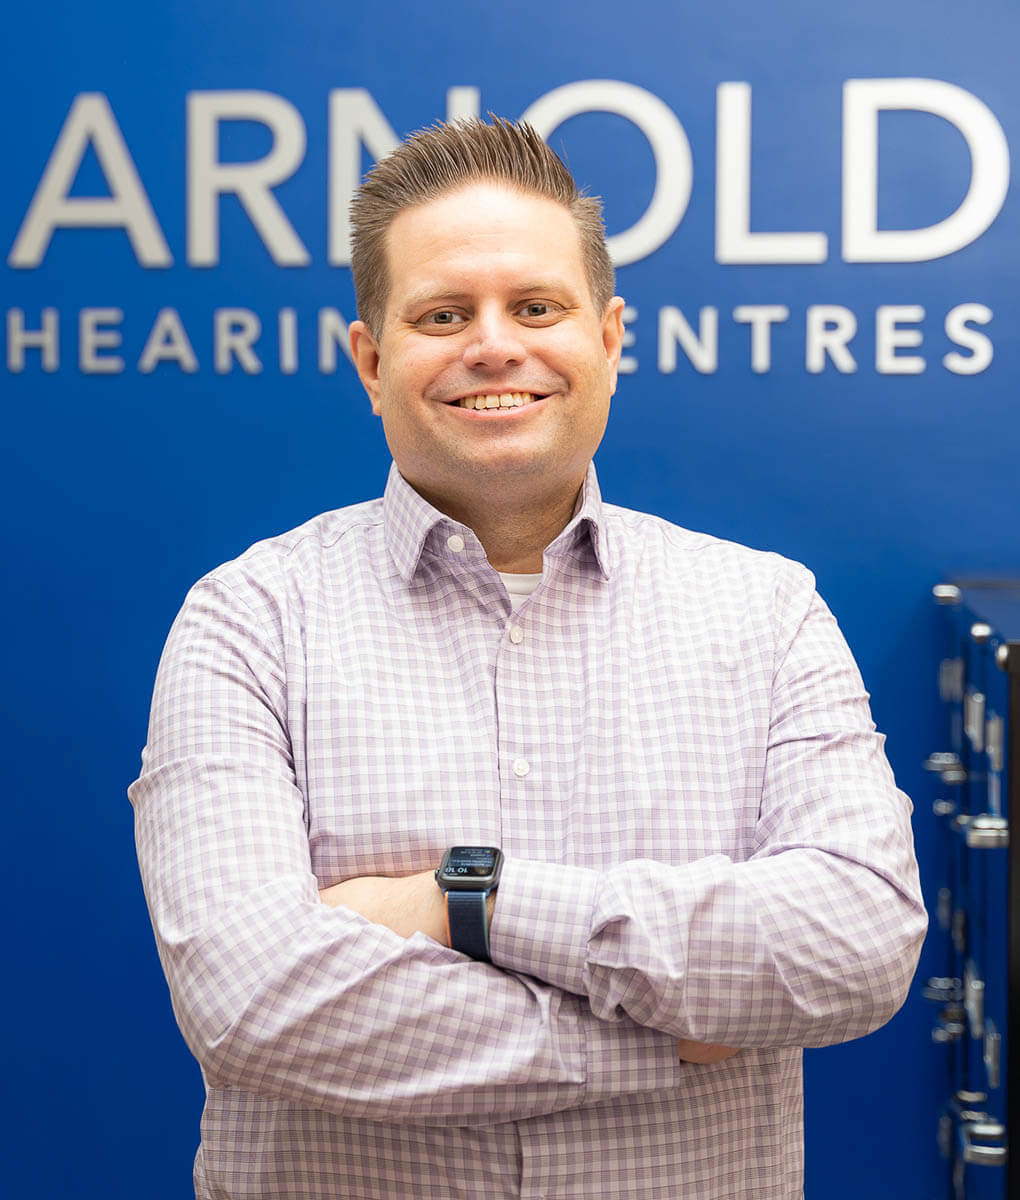 Chris Arnold, Hearing Instrument Specialist and Owner of Arnold Hearing Centres